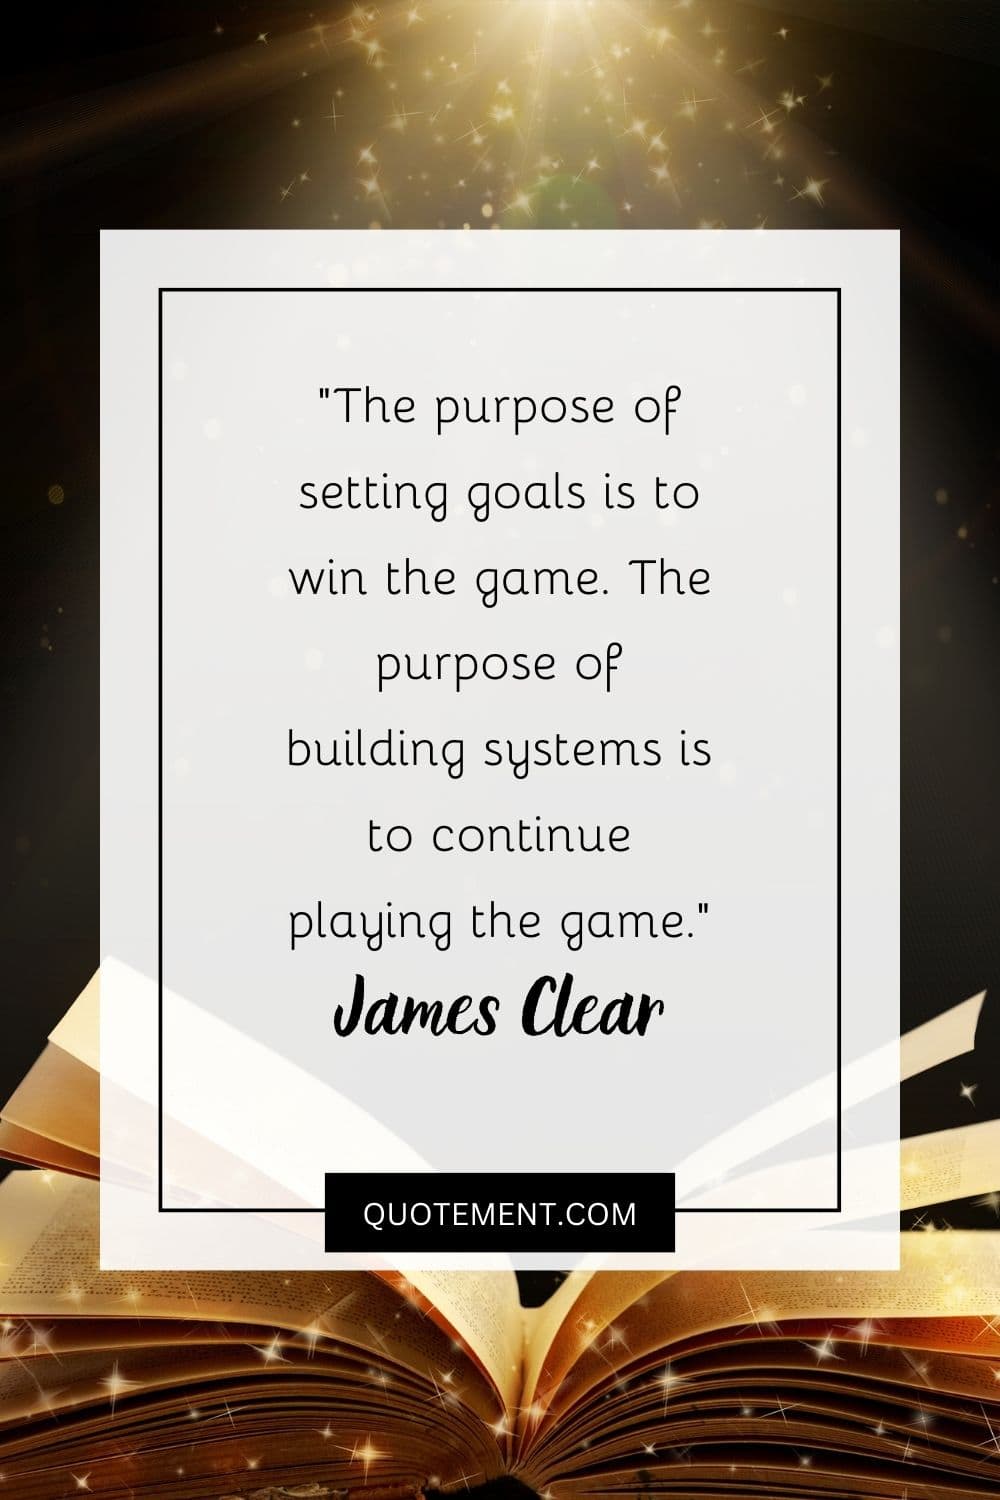 The purpose of setting goals is to win the game